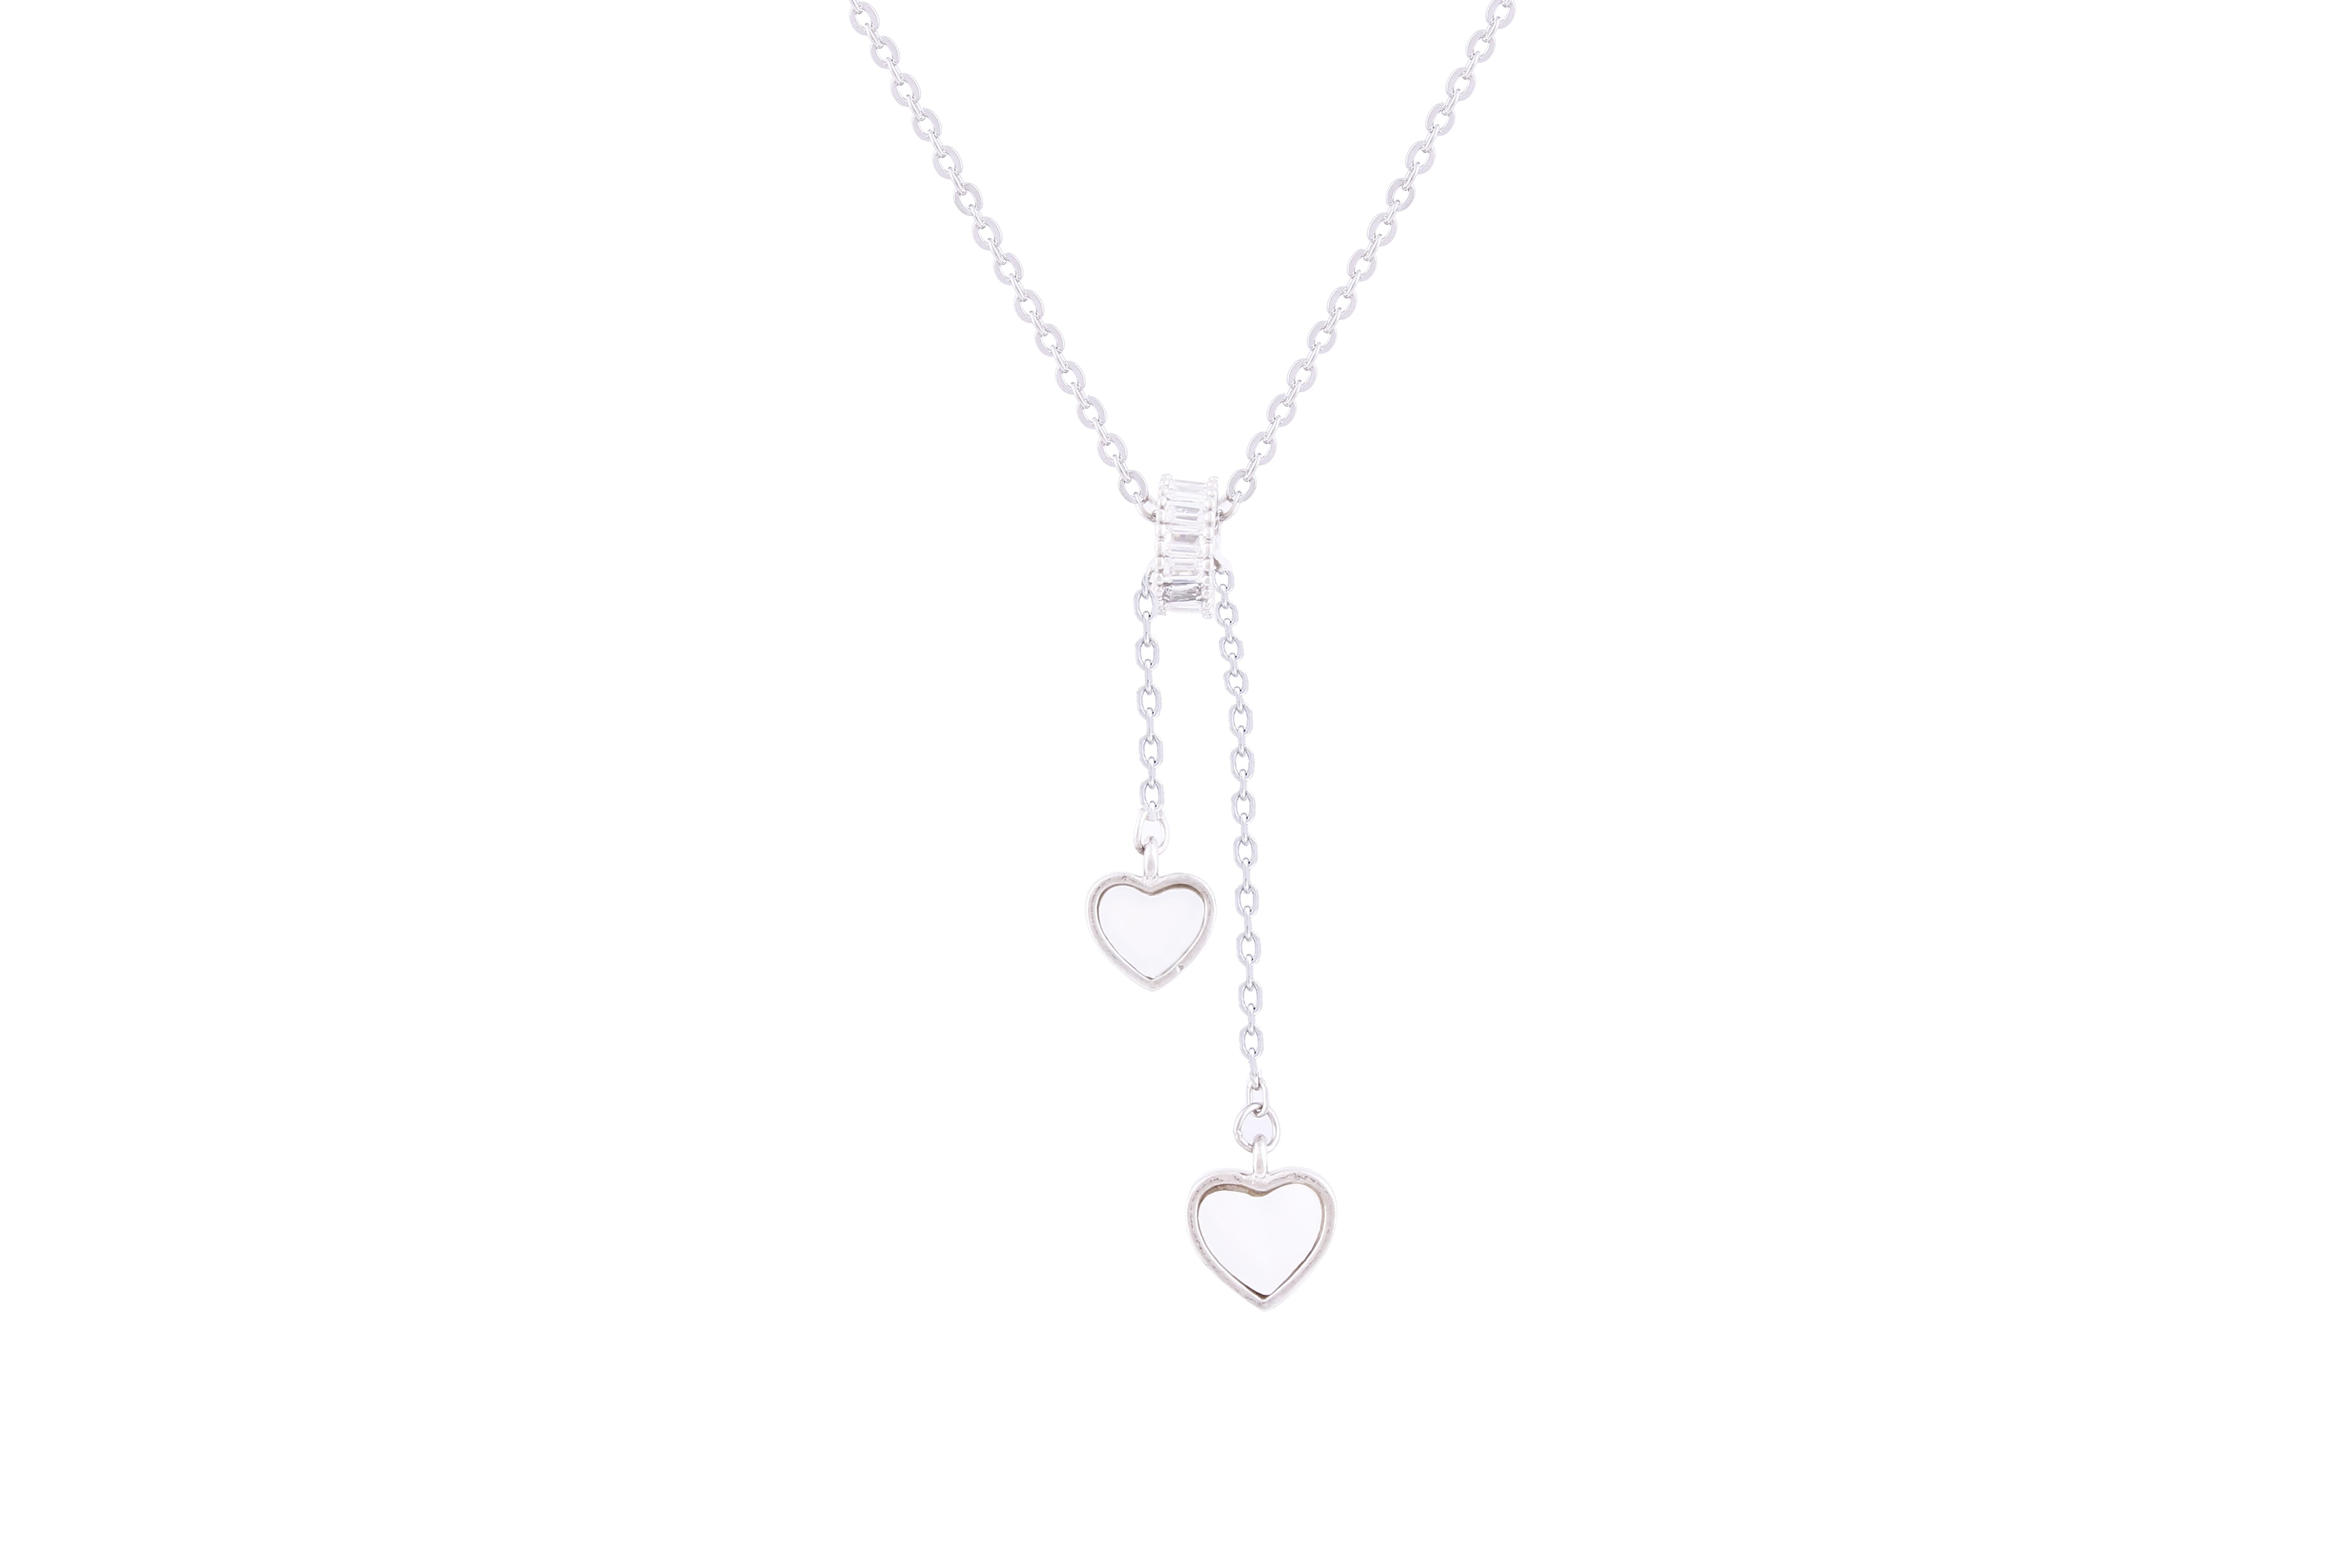 Asfour 925 Sterling Silver Necklace With Hearts Design NR0492